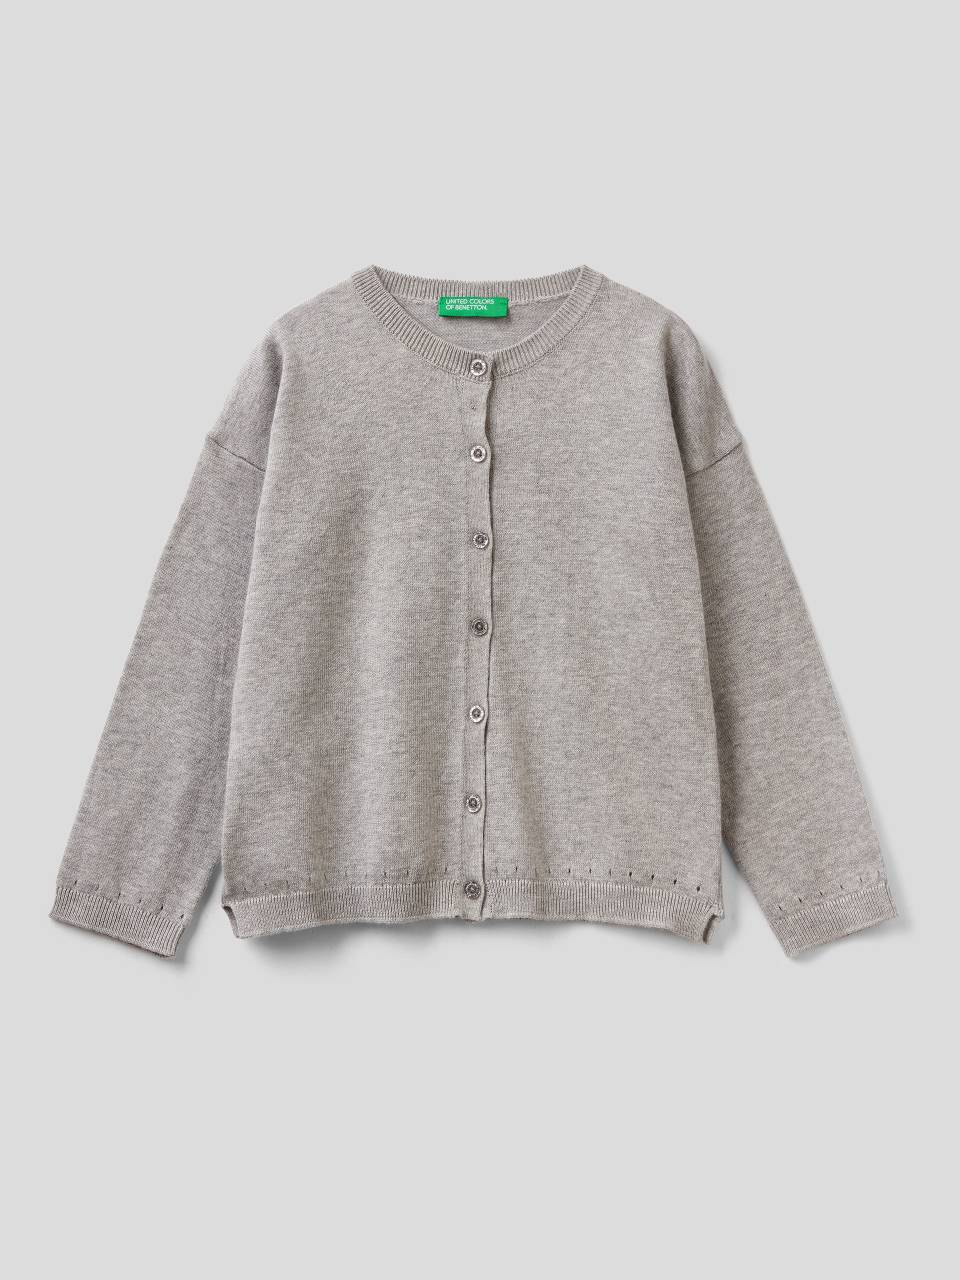 Benetton Cardigan with glittery buttons. 1